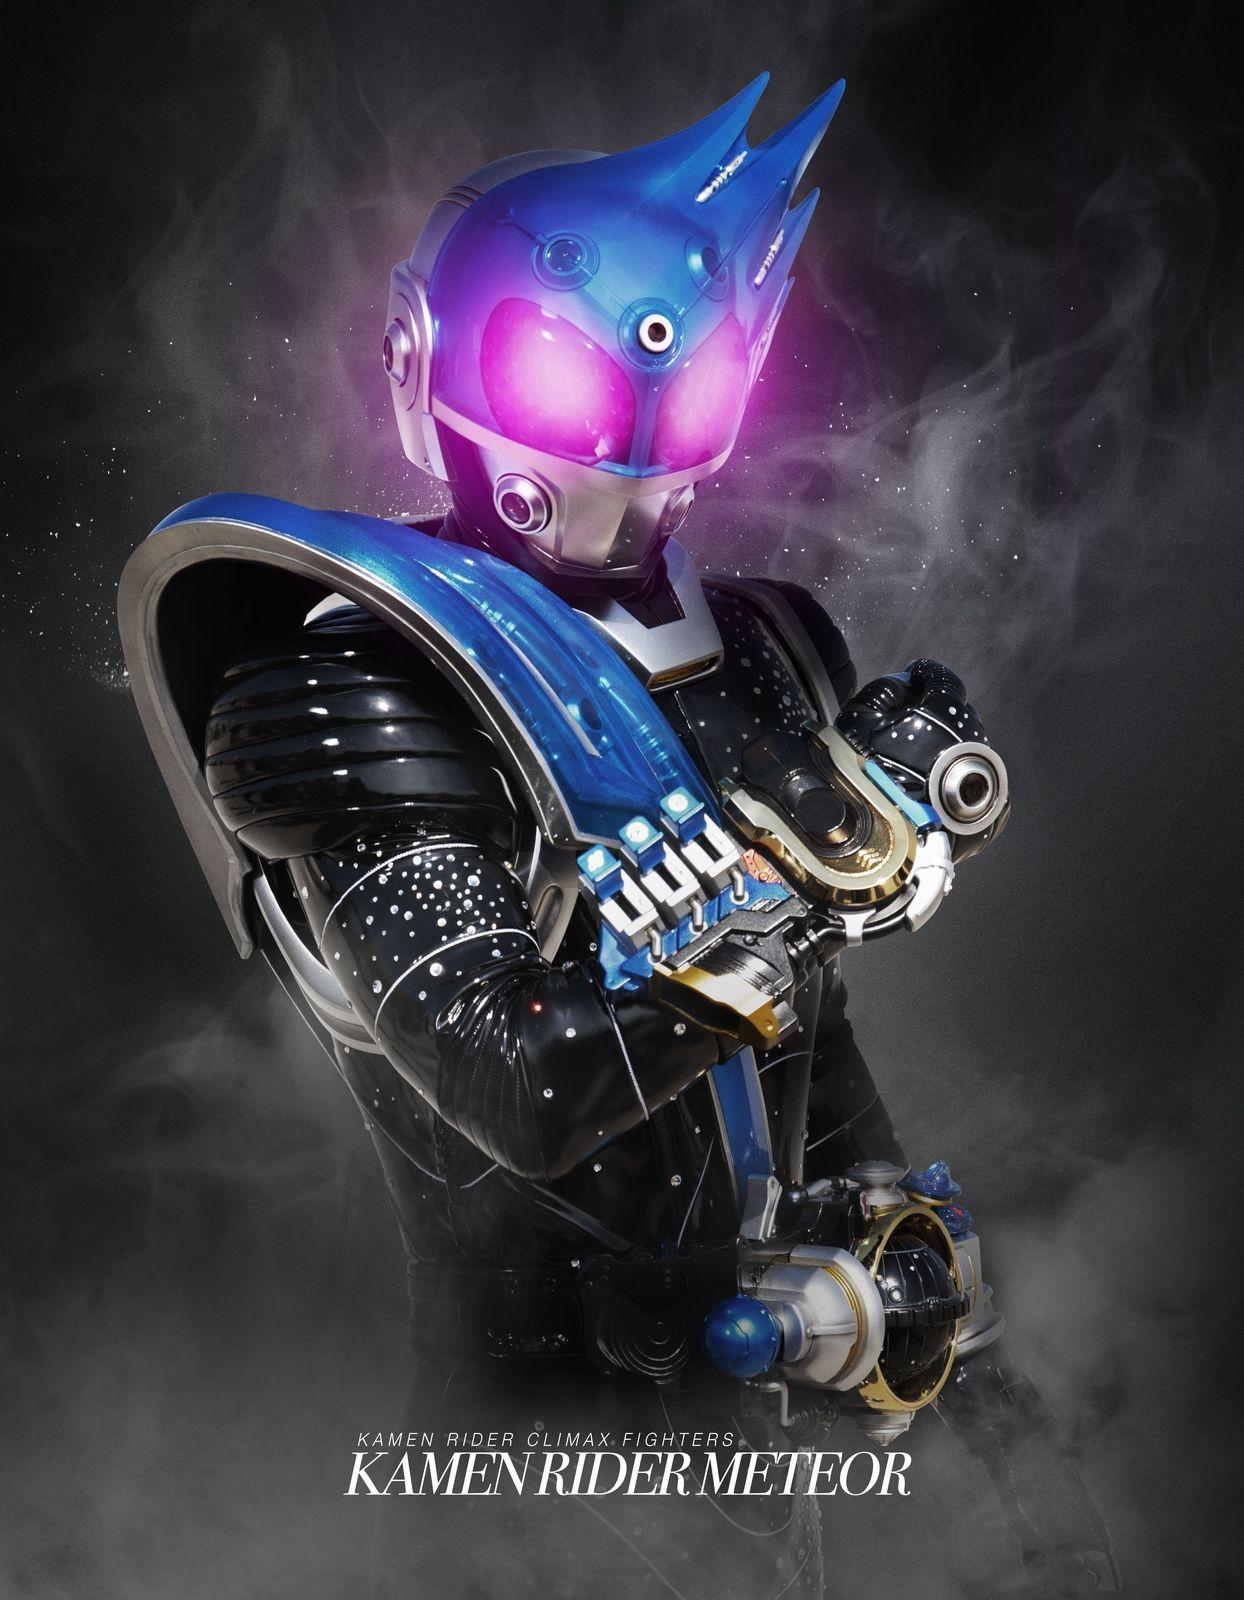 Kamen Rider Climax Fighters Rider Character Image